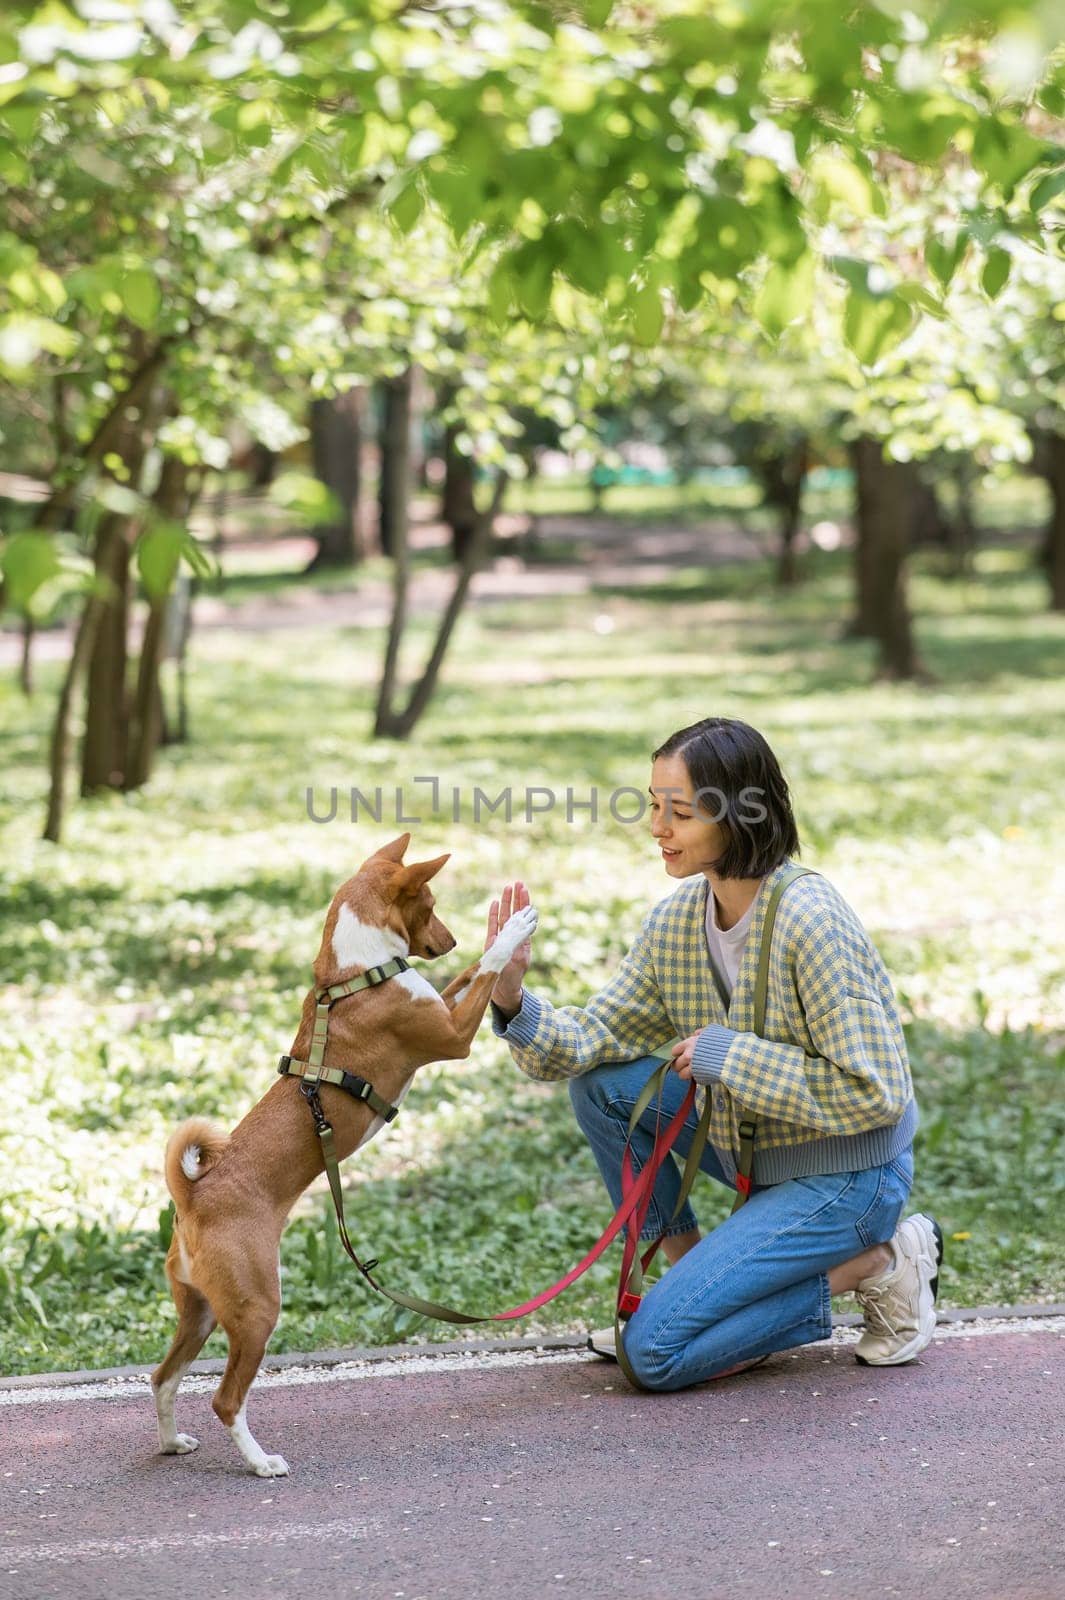 African dog sabbenji high fives the owner on a walk in the park